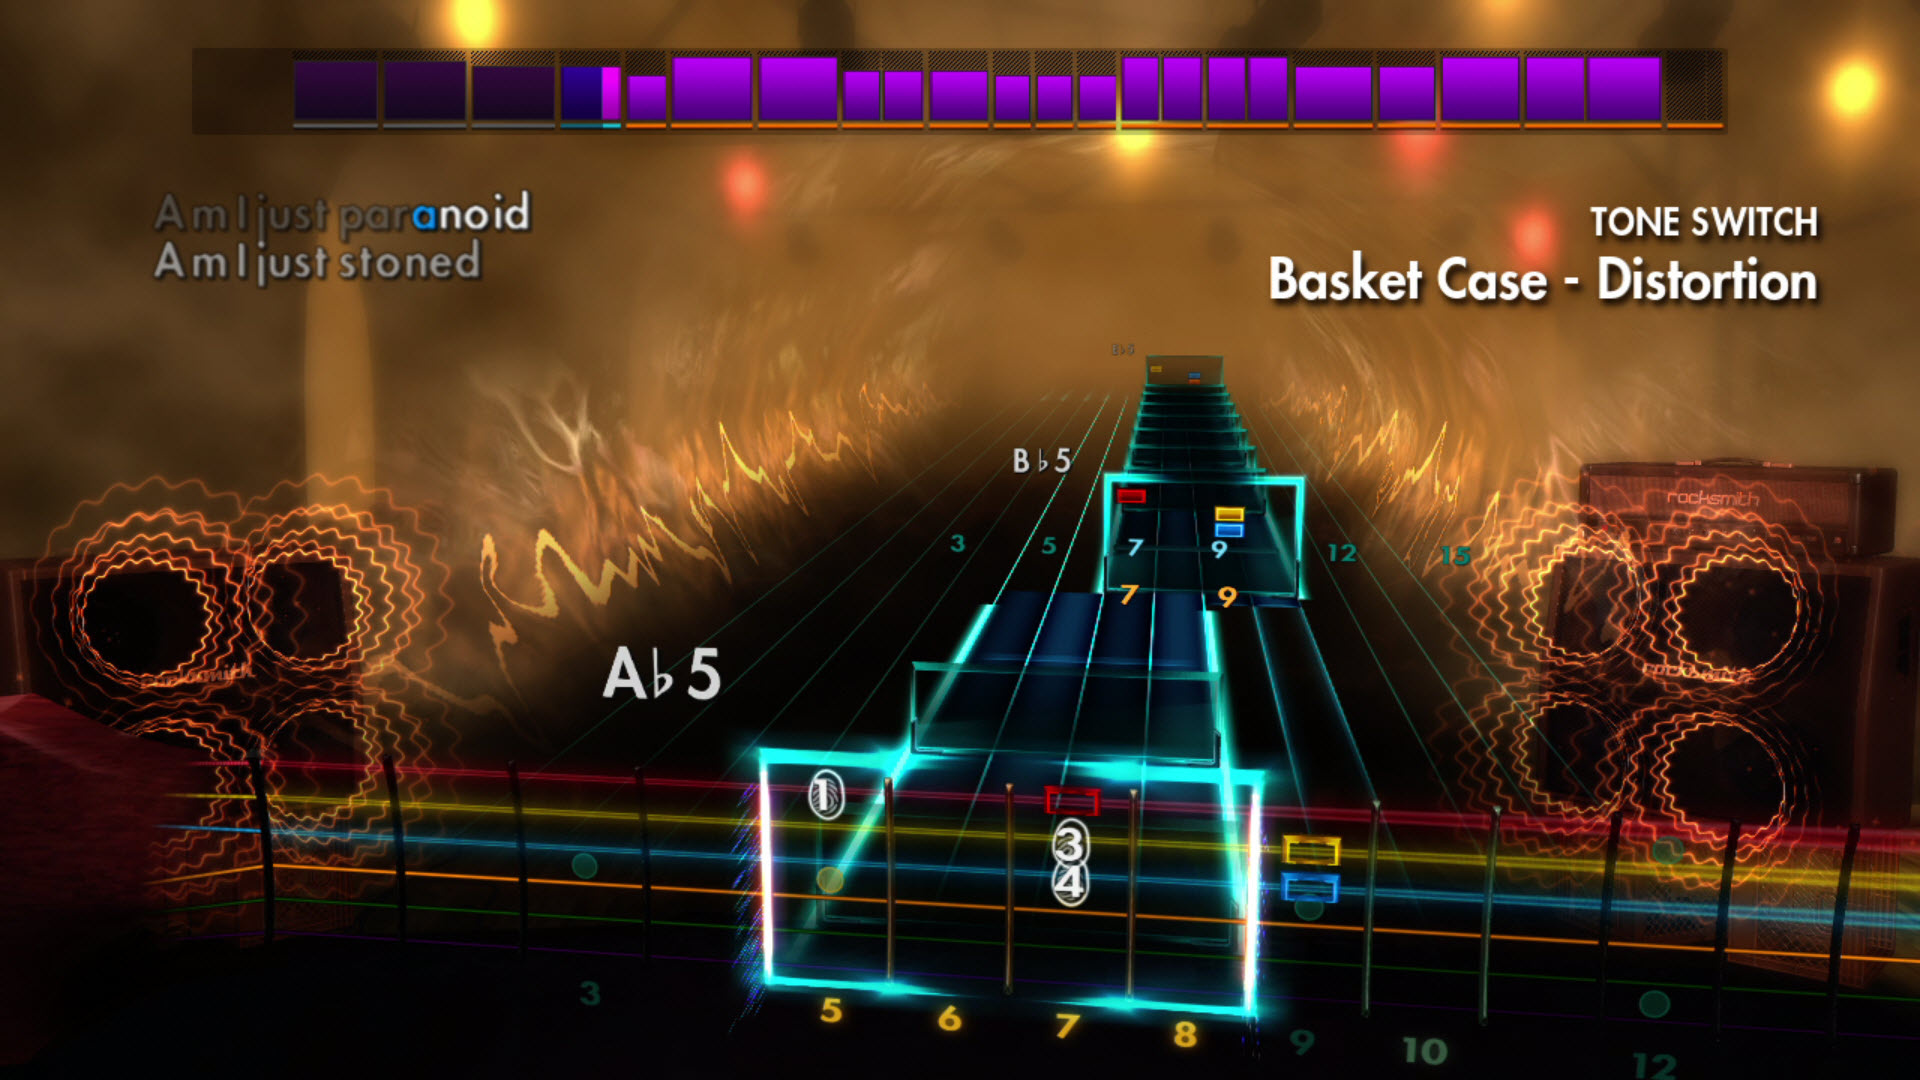 Rocksmith 2014 Edition (Game Only) for PlayStation 3